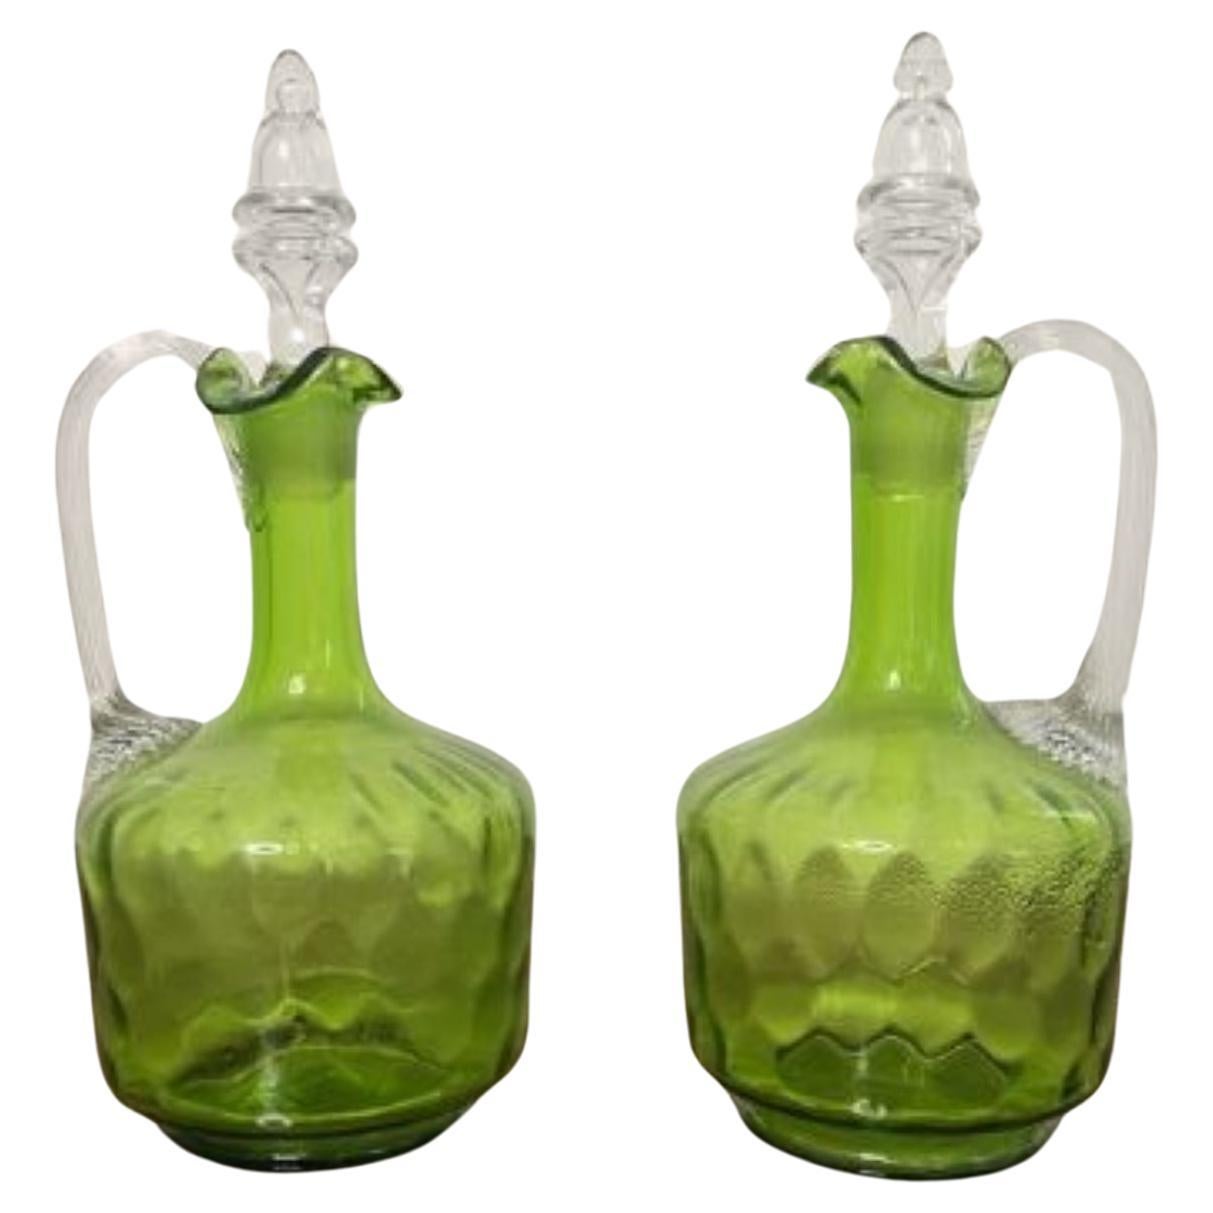 Fine quality pair of antique Victorian green glass decanters 